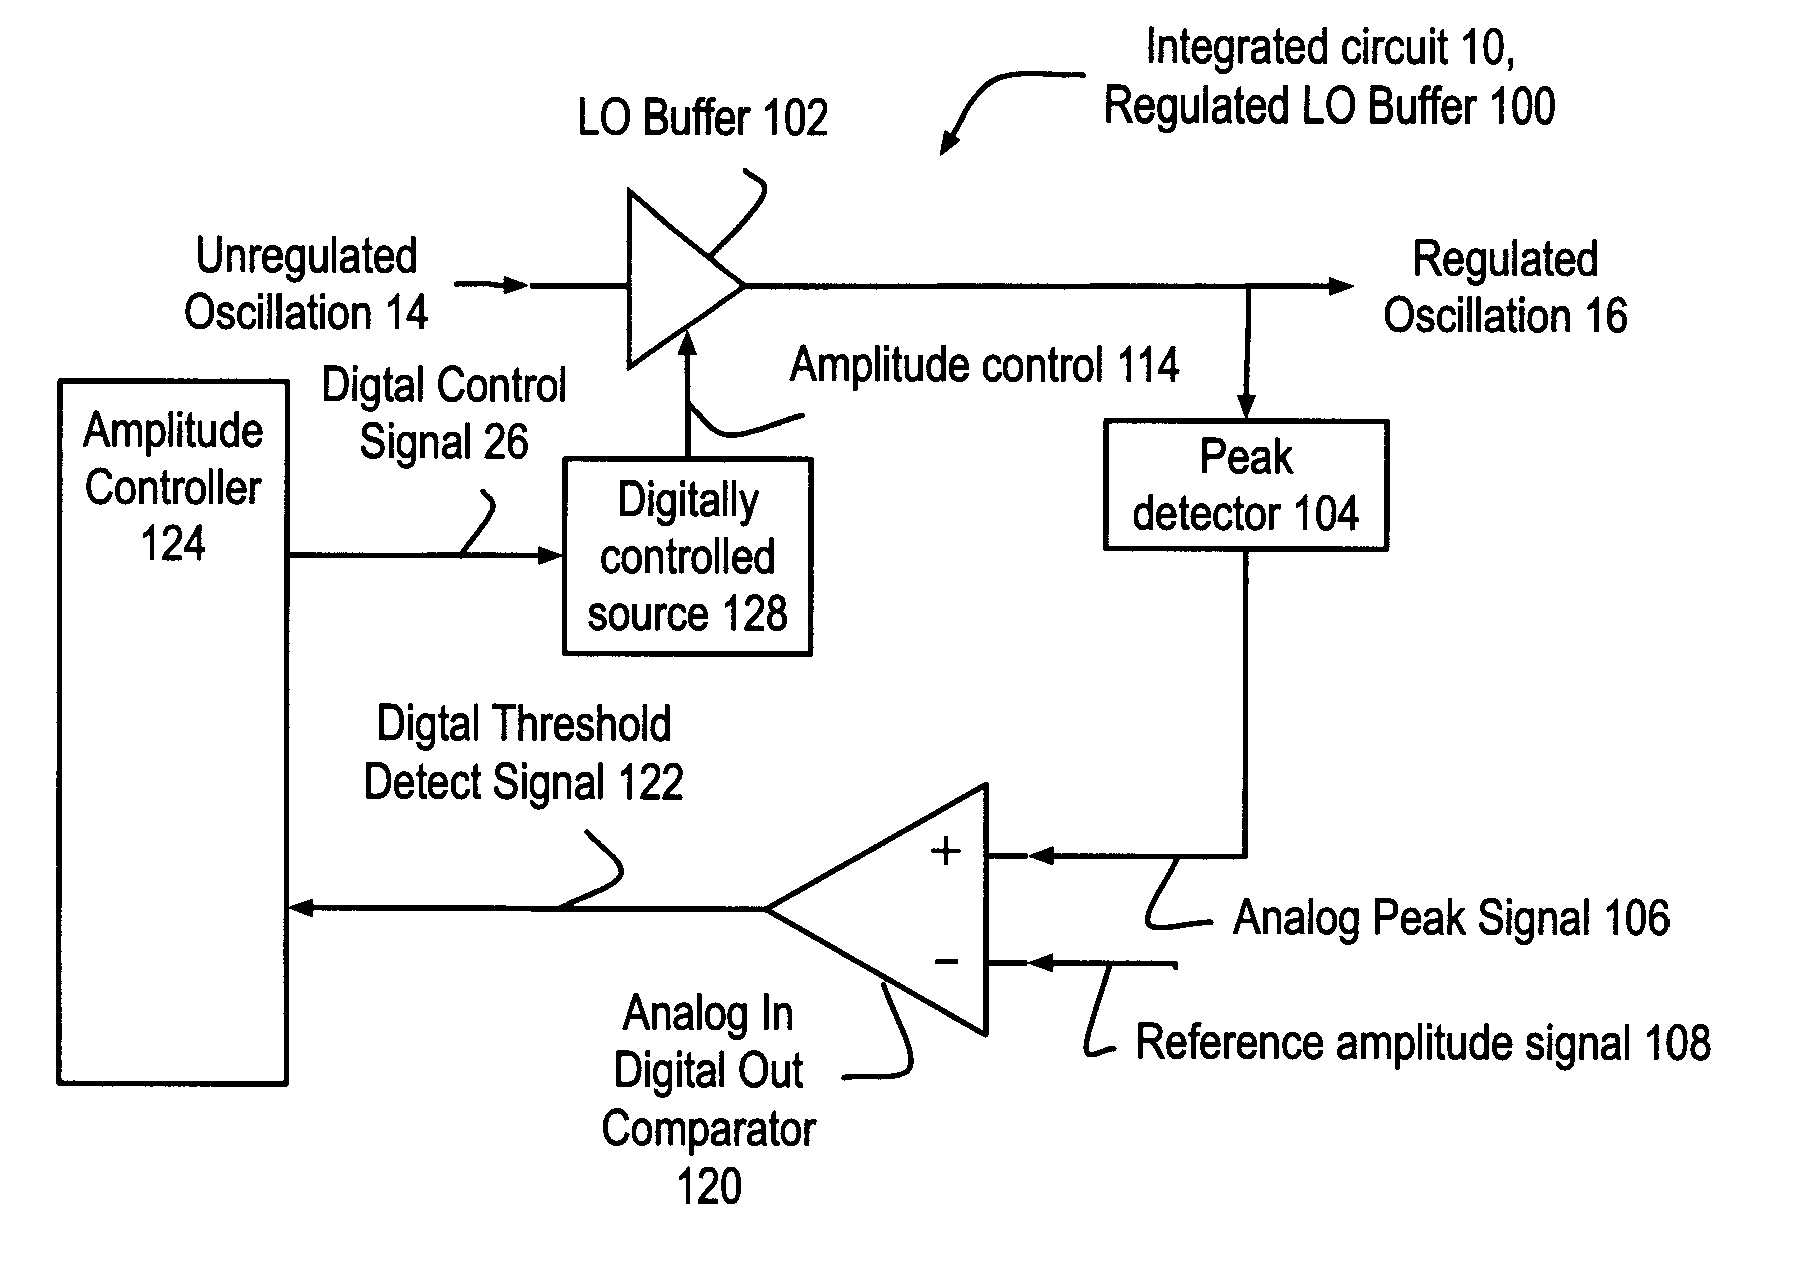 Method and apparatus for a digital regulated local oscillation (LO) buffer in radio frequency circuits